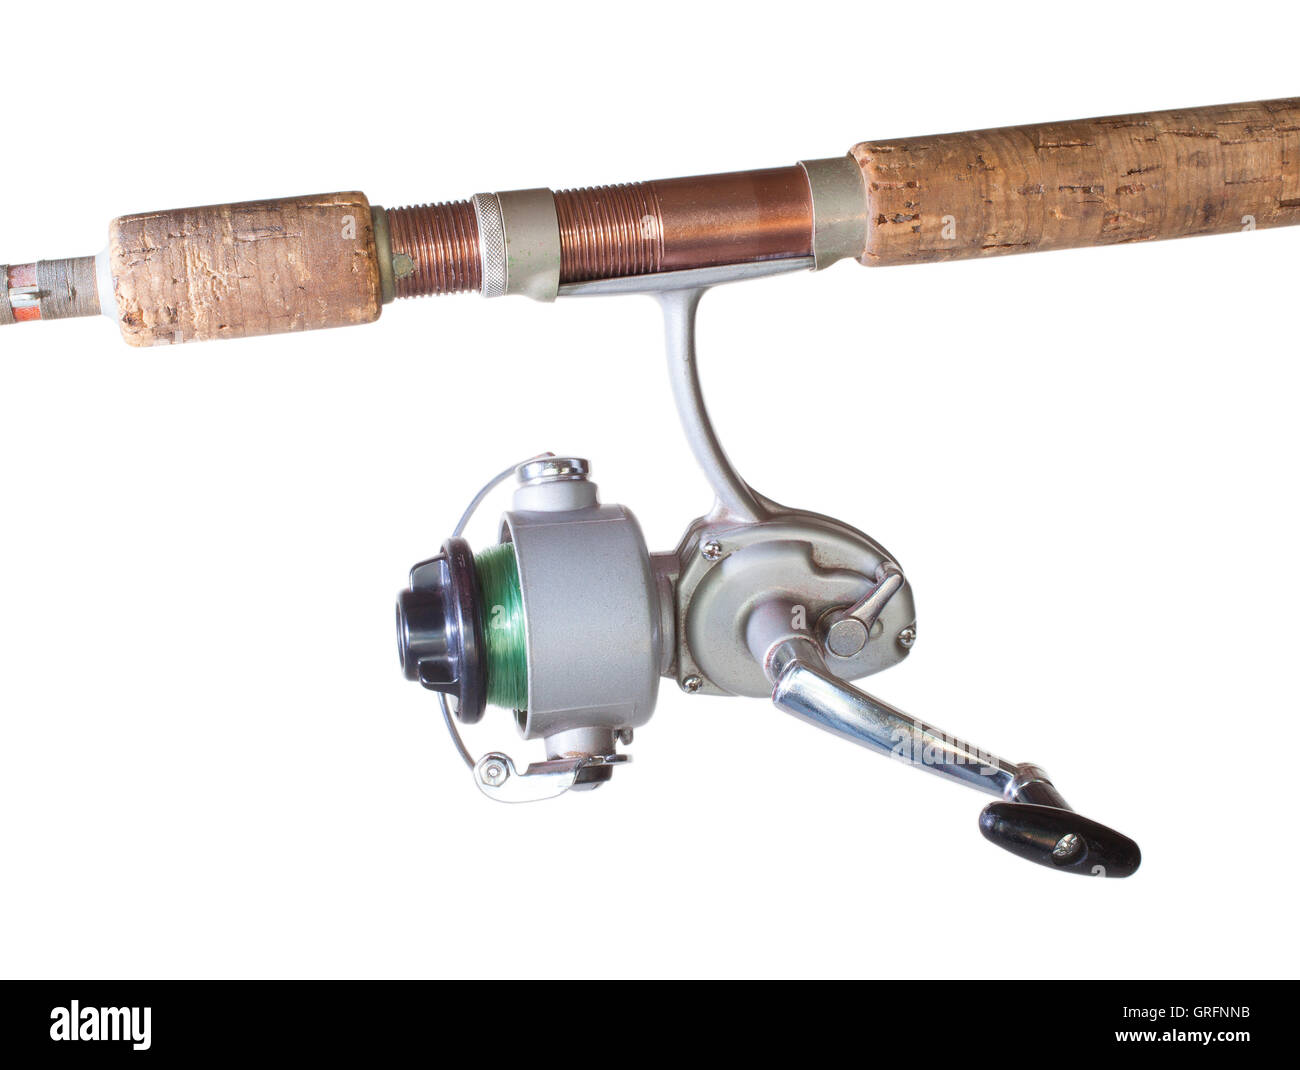 Old spinning reel with green fishing line and a rod isolated on white Stock Photo